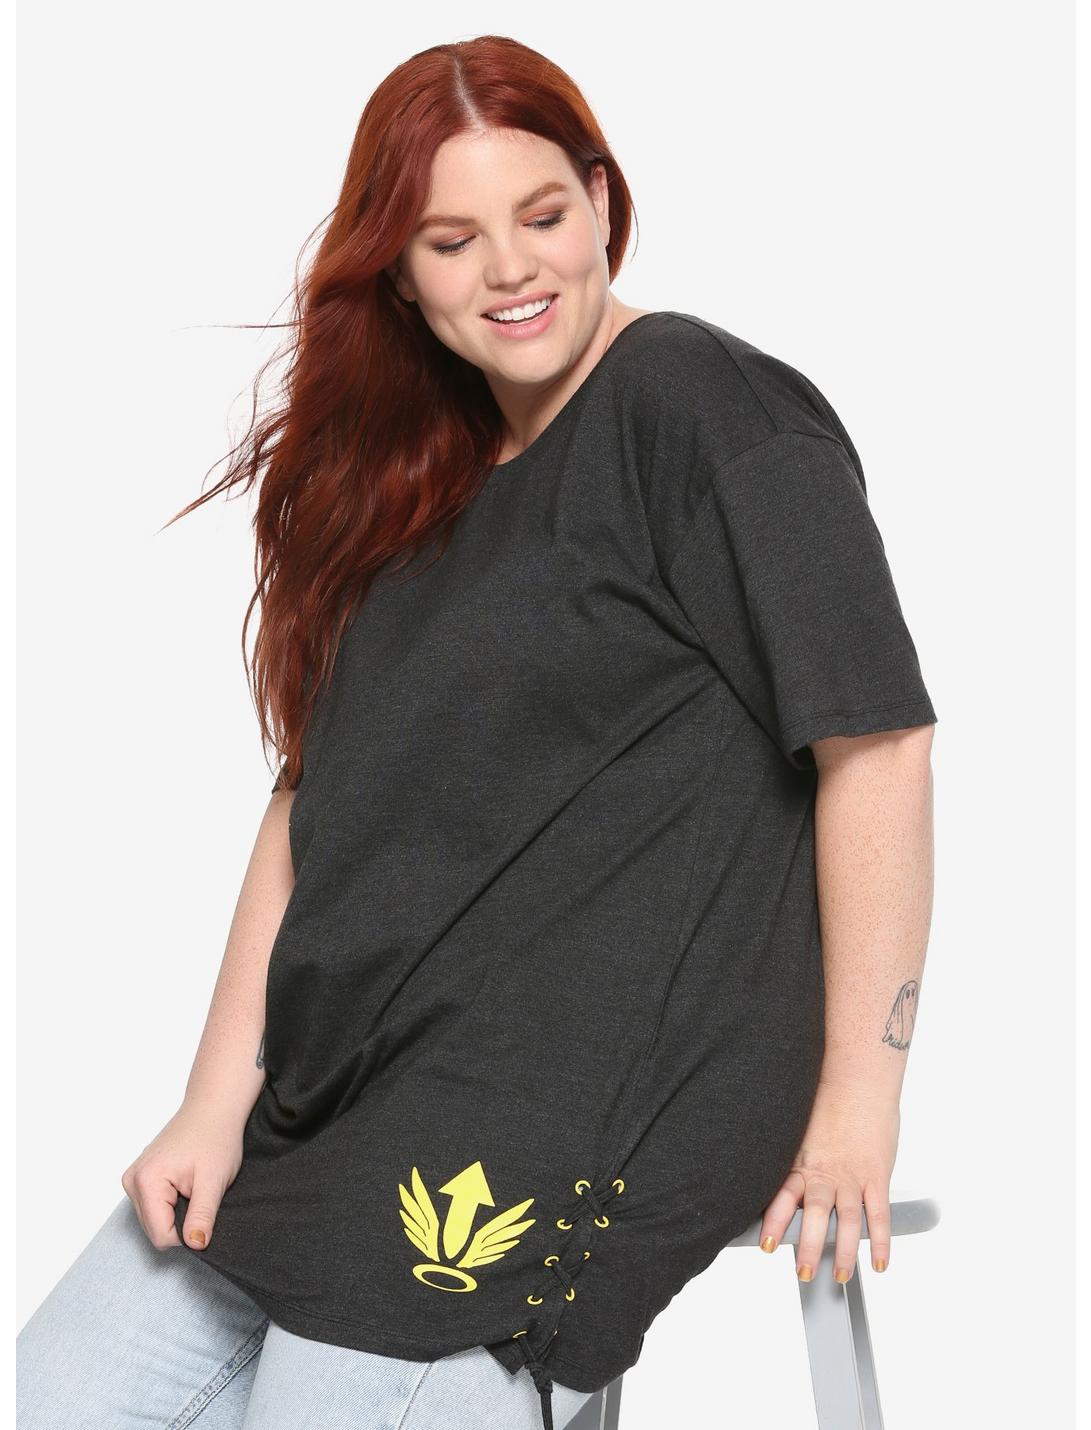 Overwatch Mercy Side Lace-Up T-Shirt Plus Size, MULTI, hi-res